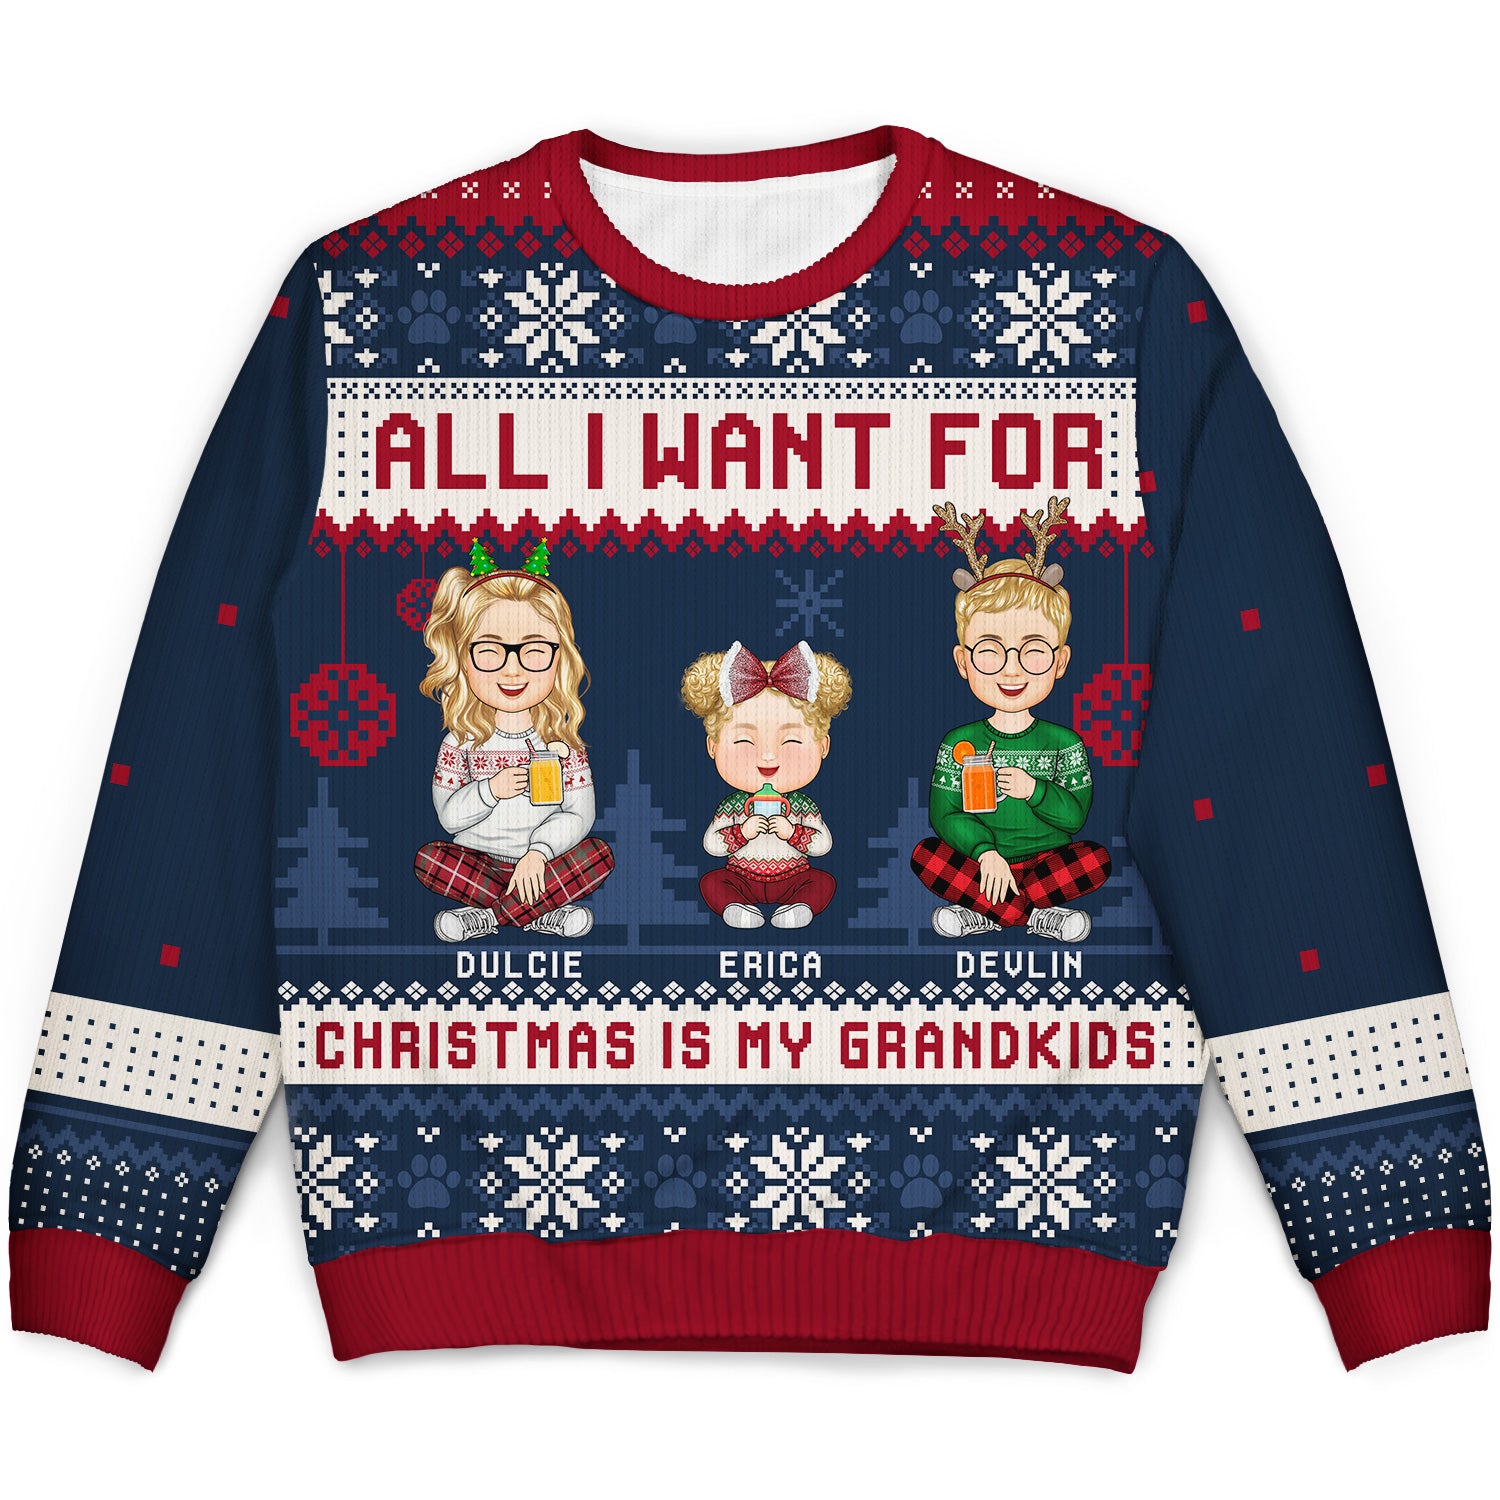 All I Want For Christmas Is My Grandkids - Christmas Gift For Grandma, Grandpa, Grandmother, Grandfather - Personalized Unisex Ugly Sweater